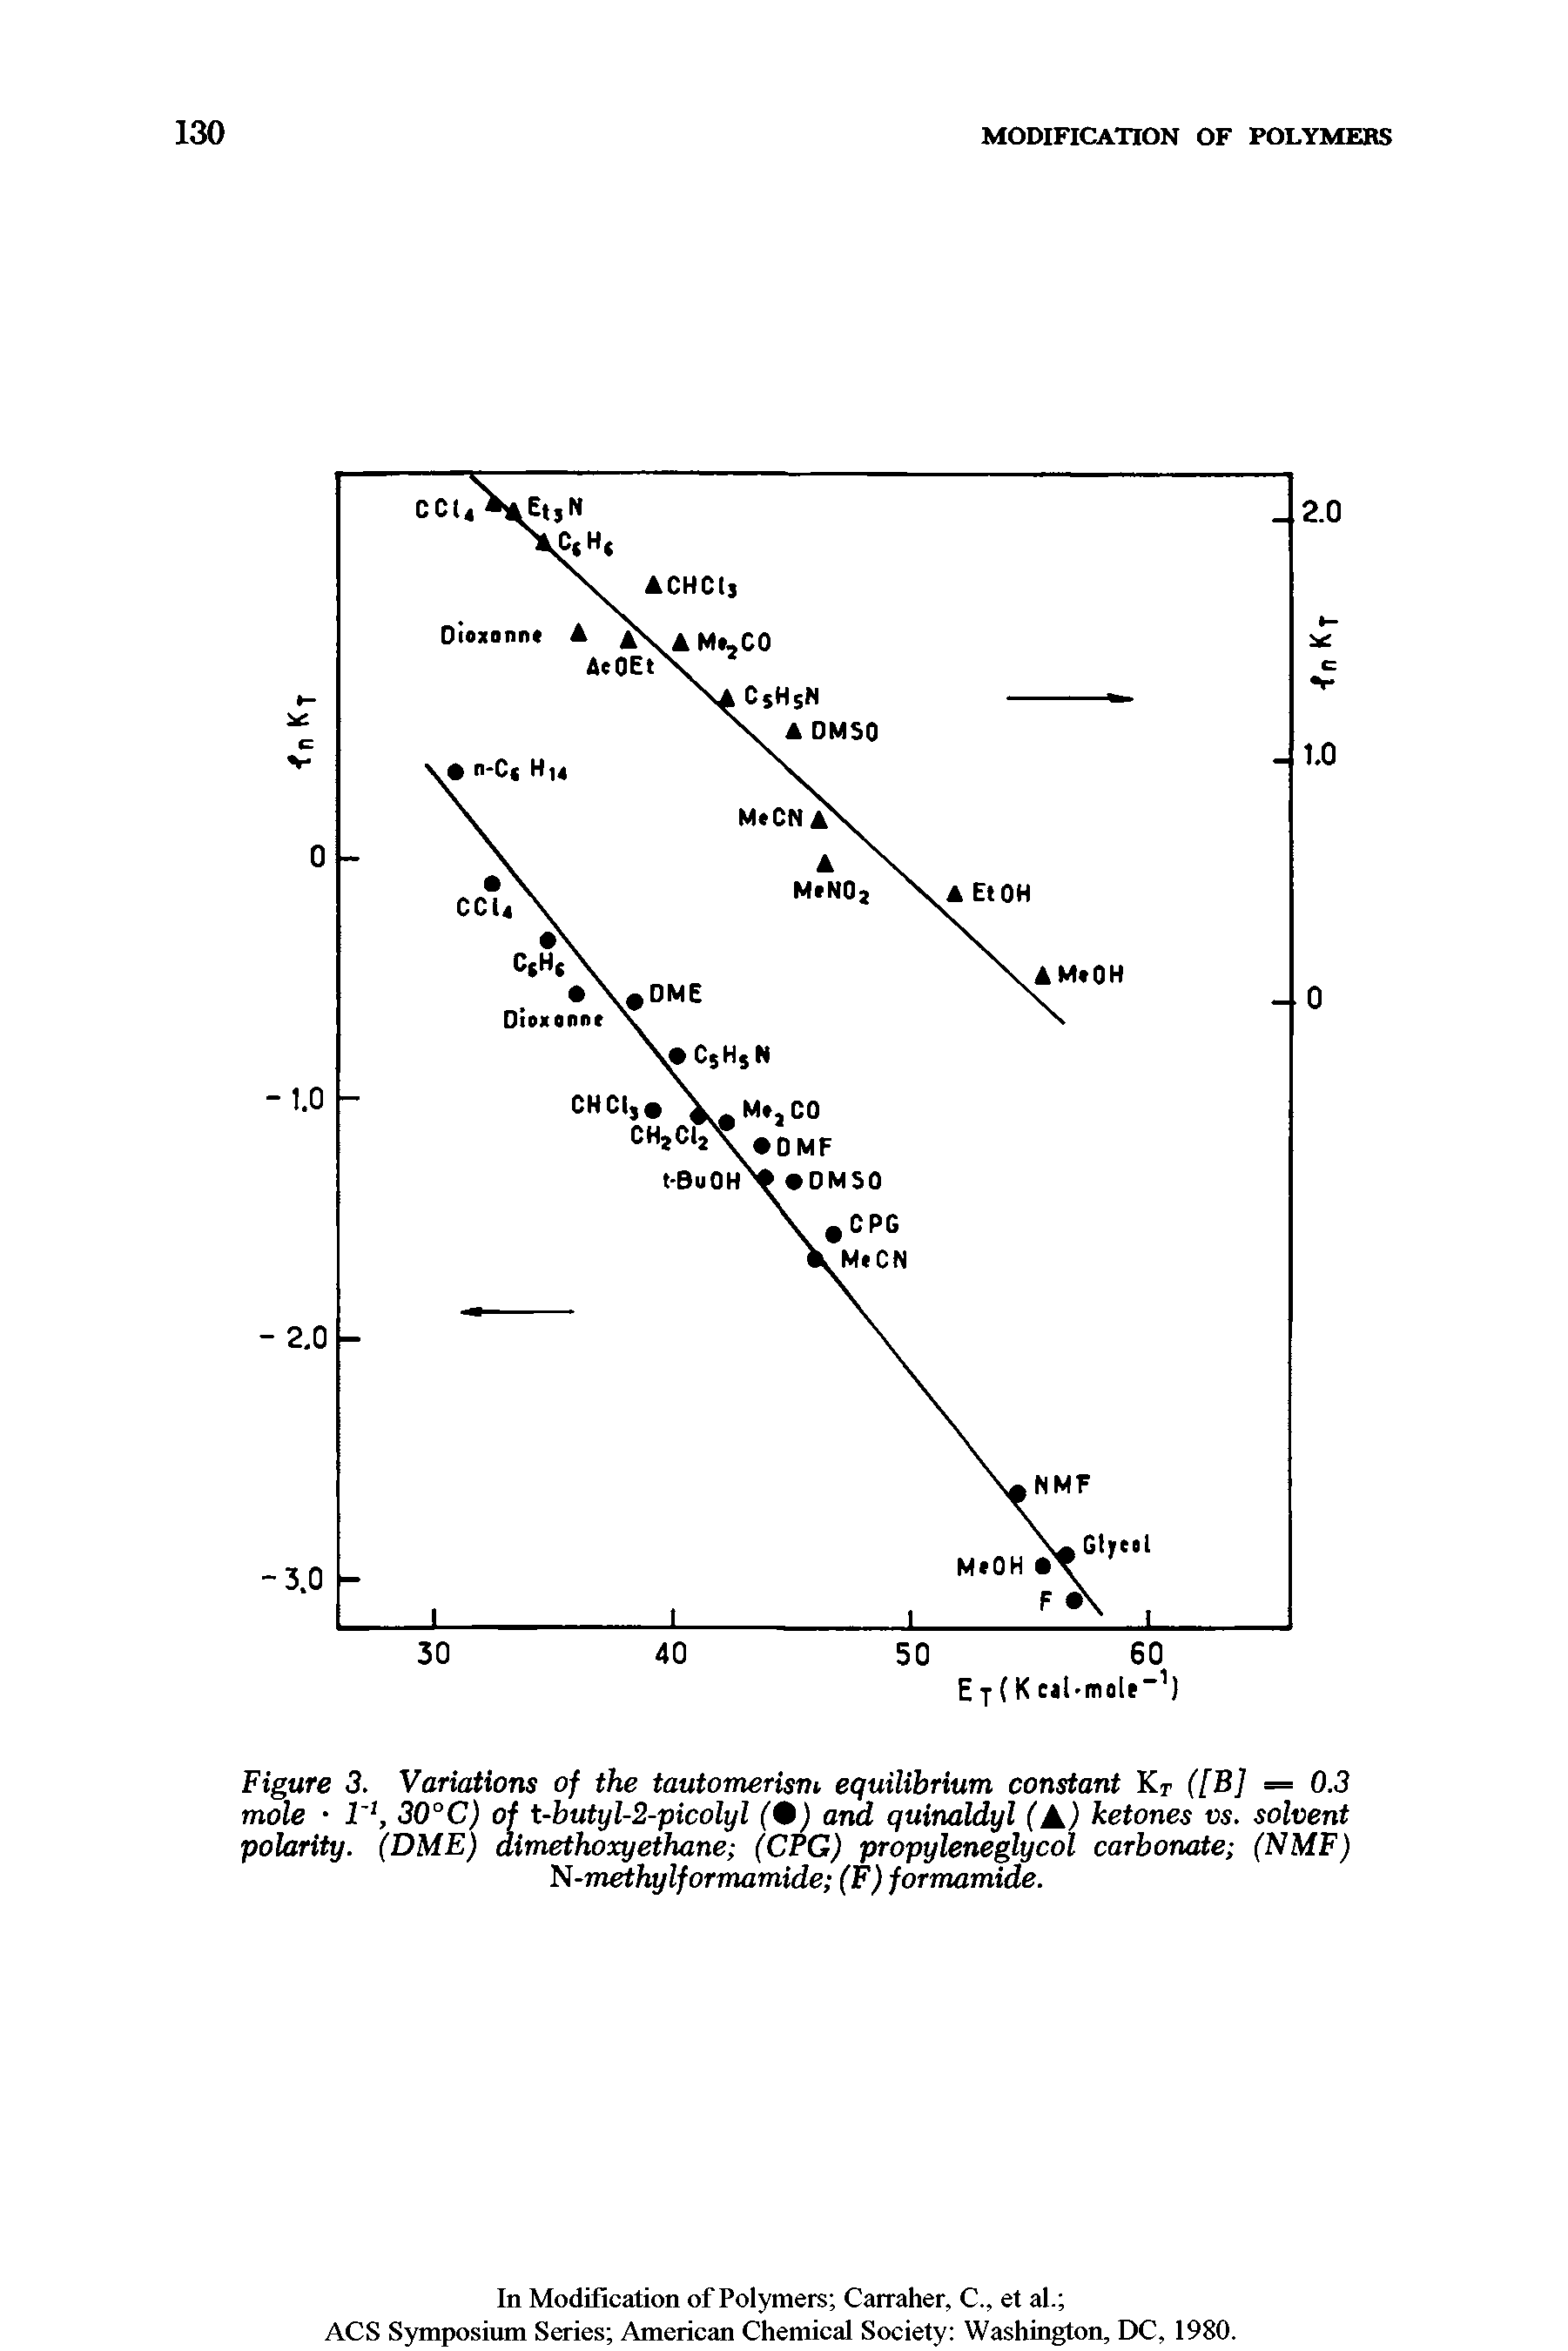 Figure 3. Variations of the tautomerism equilibrium constant Kr ([B] = 0.3 mole l 1, 30°C) of t-butyl-2-picolyl (0) and quinaldyl (A) ketones vs. solvent polarity. (DME) dimethoxyethane (CFG) propyleneglycol carbonate (NMF) N-methylformamide (F)formamide.